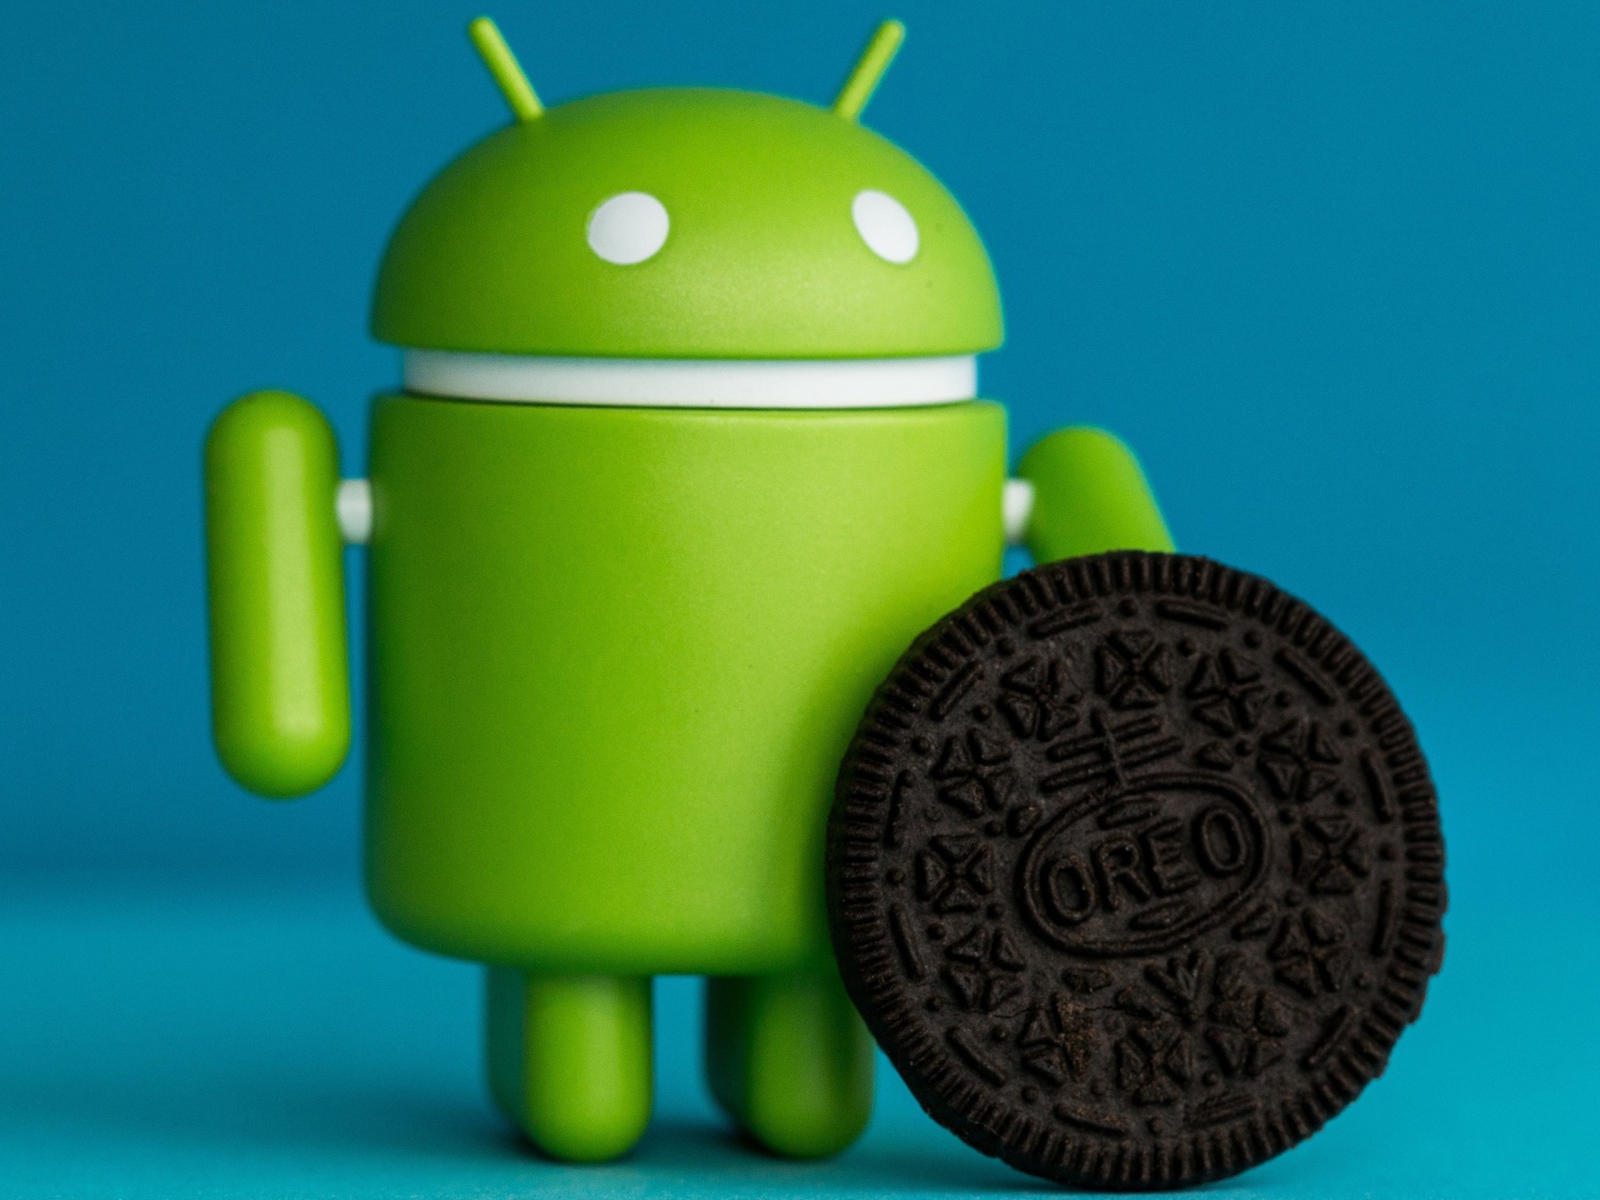 Android 8 operating system Oreo